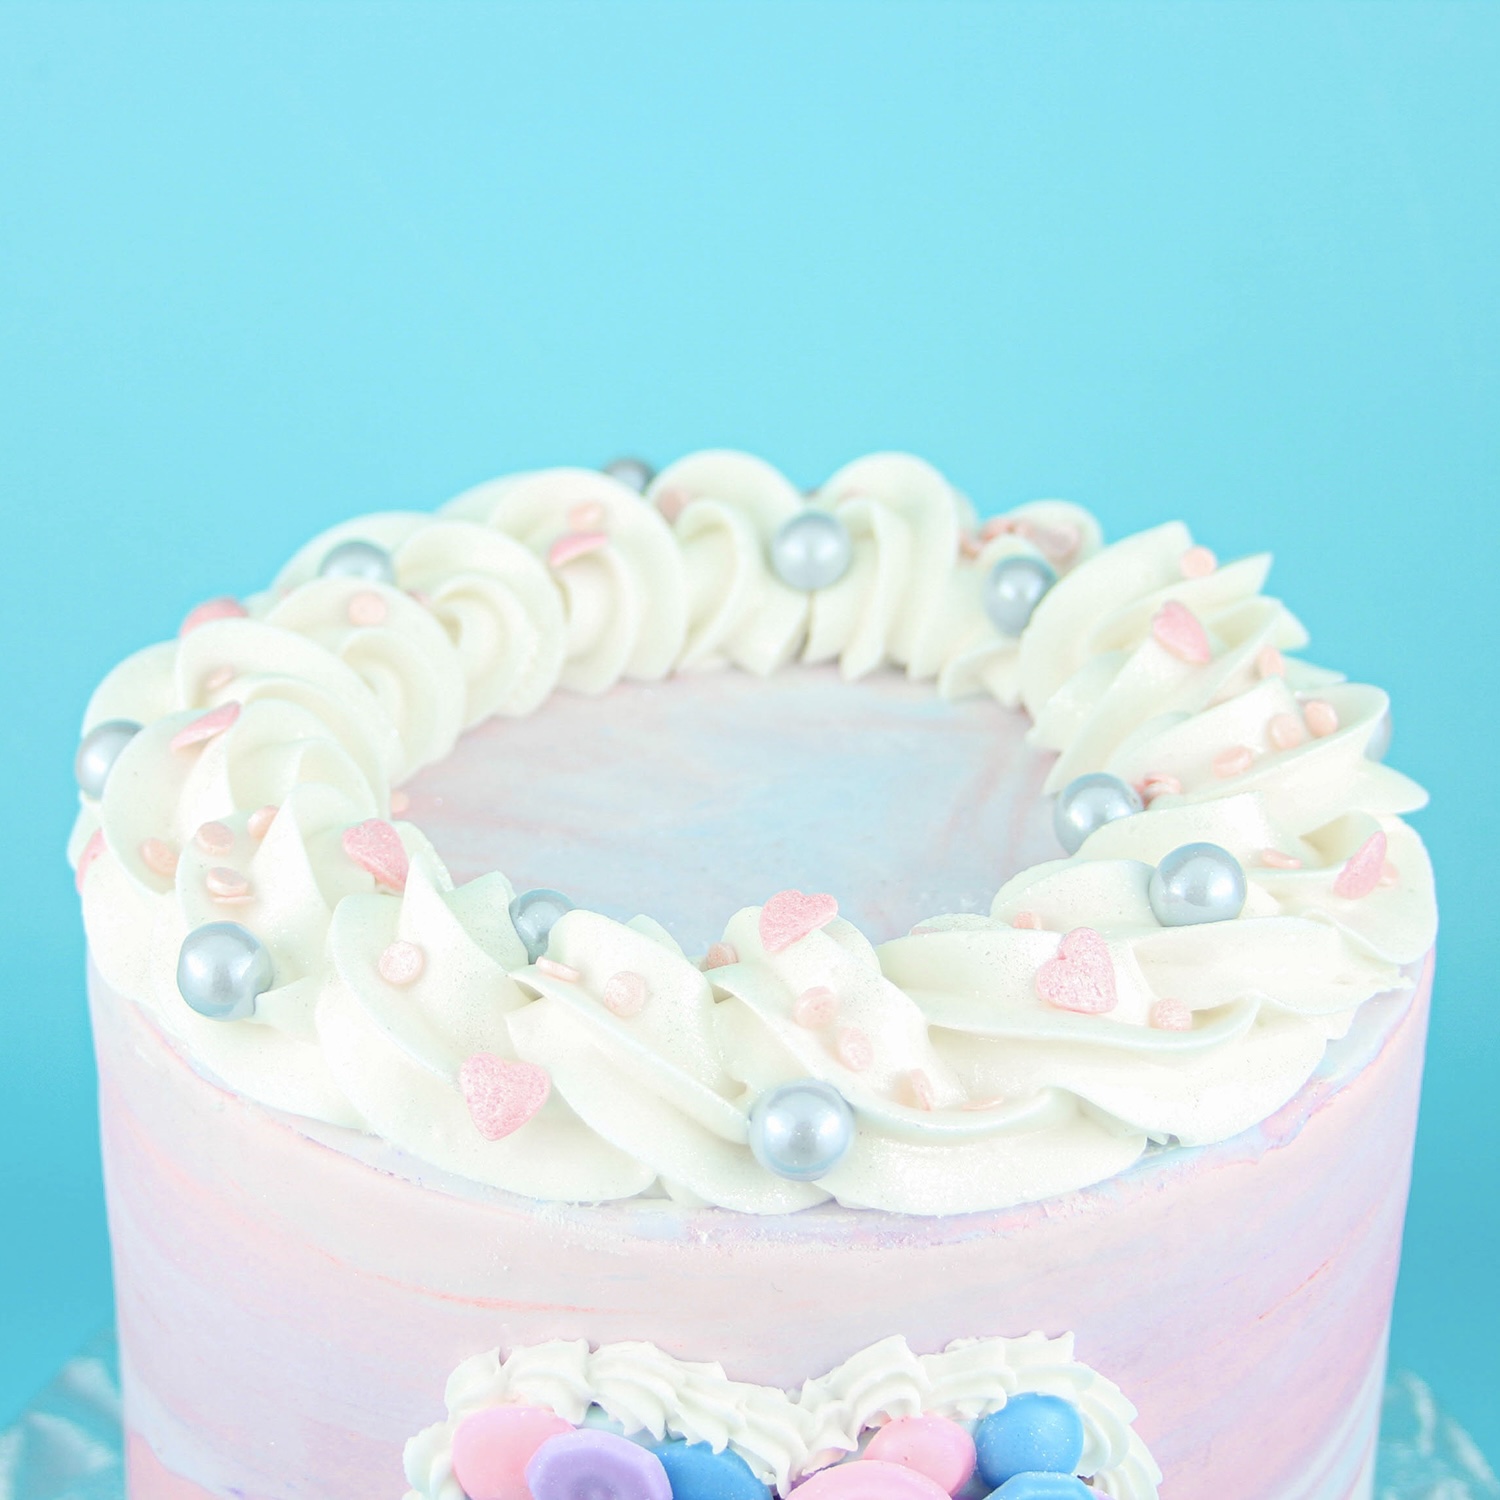 Features the buttercream spiral border on top of cake